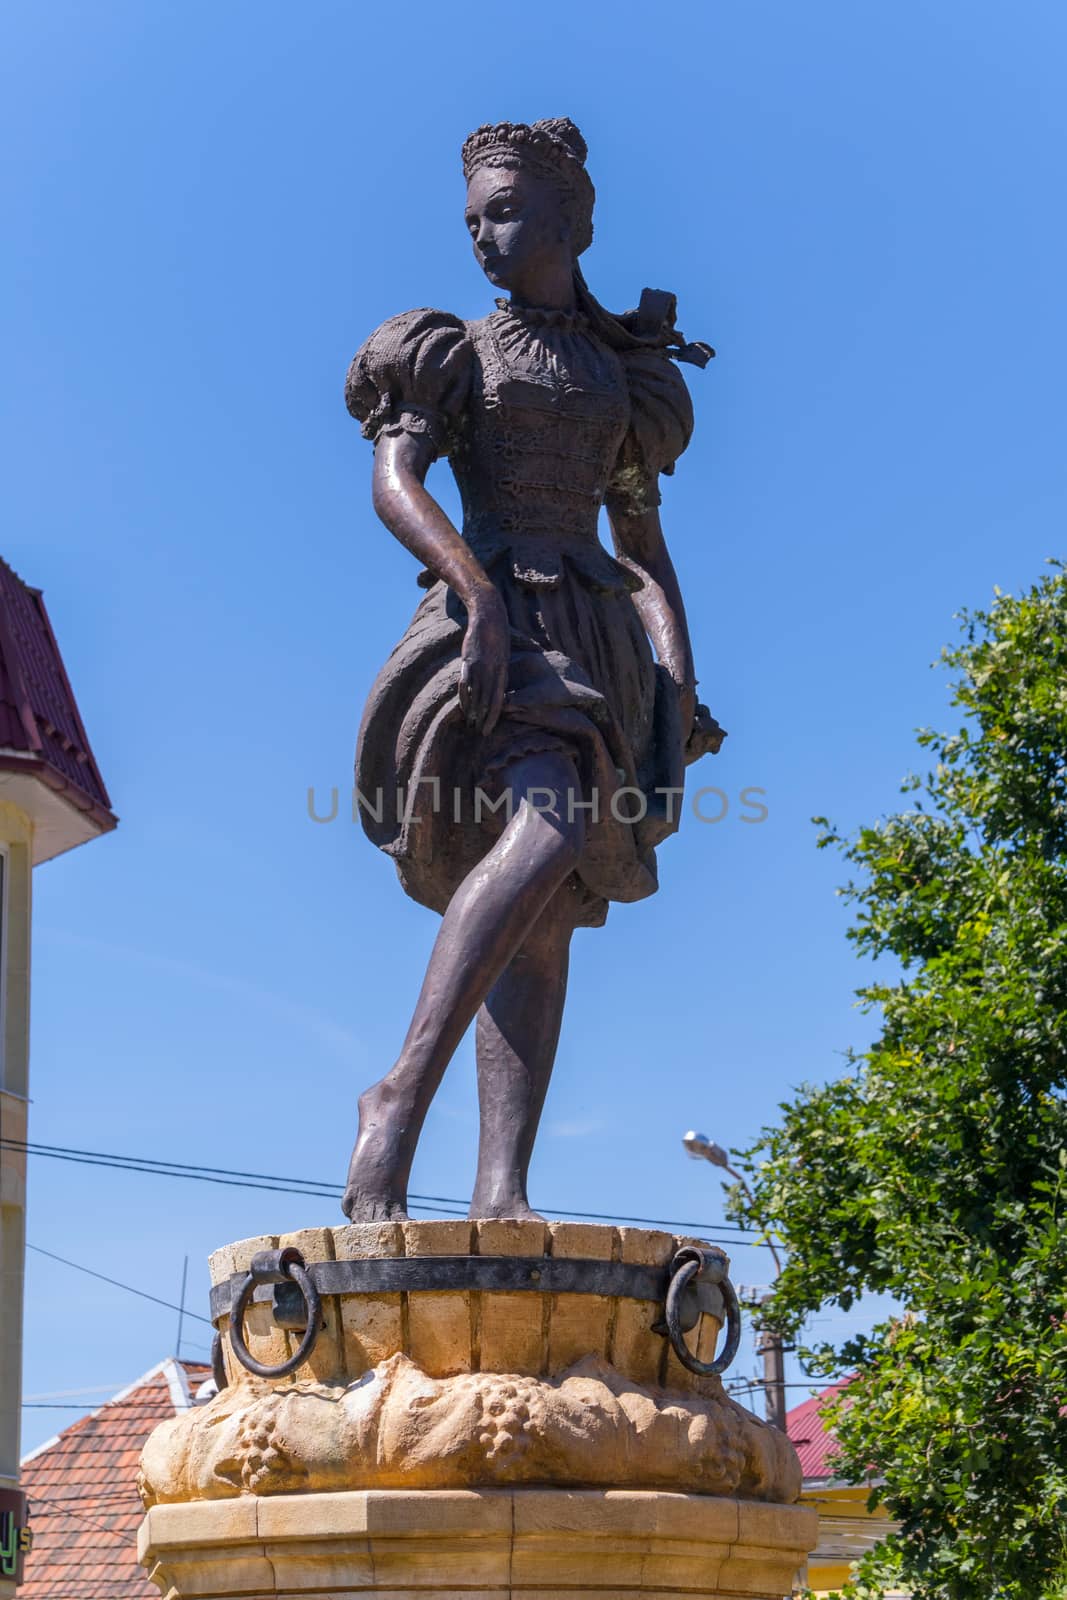 Sculpture of a girl standing on a wooden barrel standing on a pedestal. Against the background of a clear sky without clouds and foliage of trees.